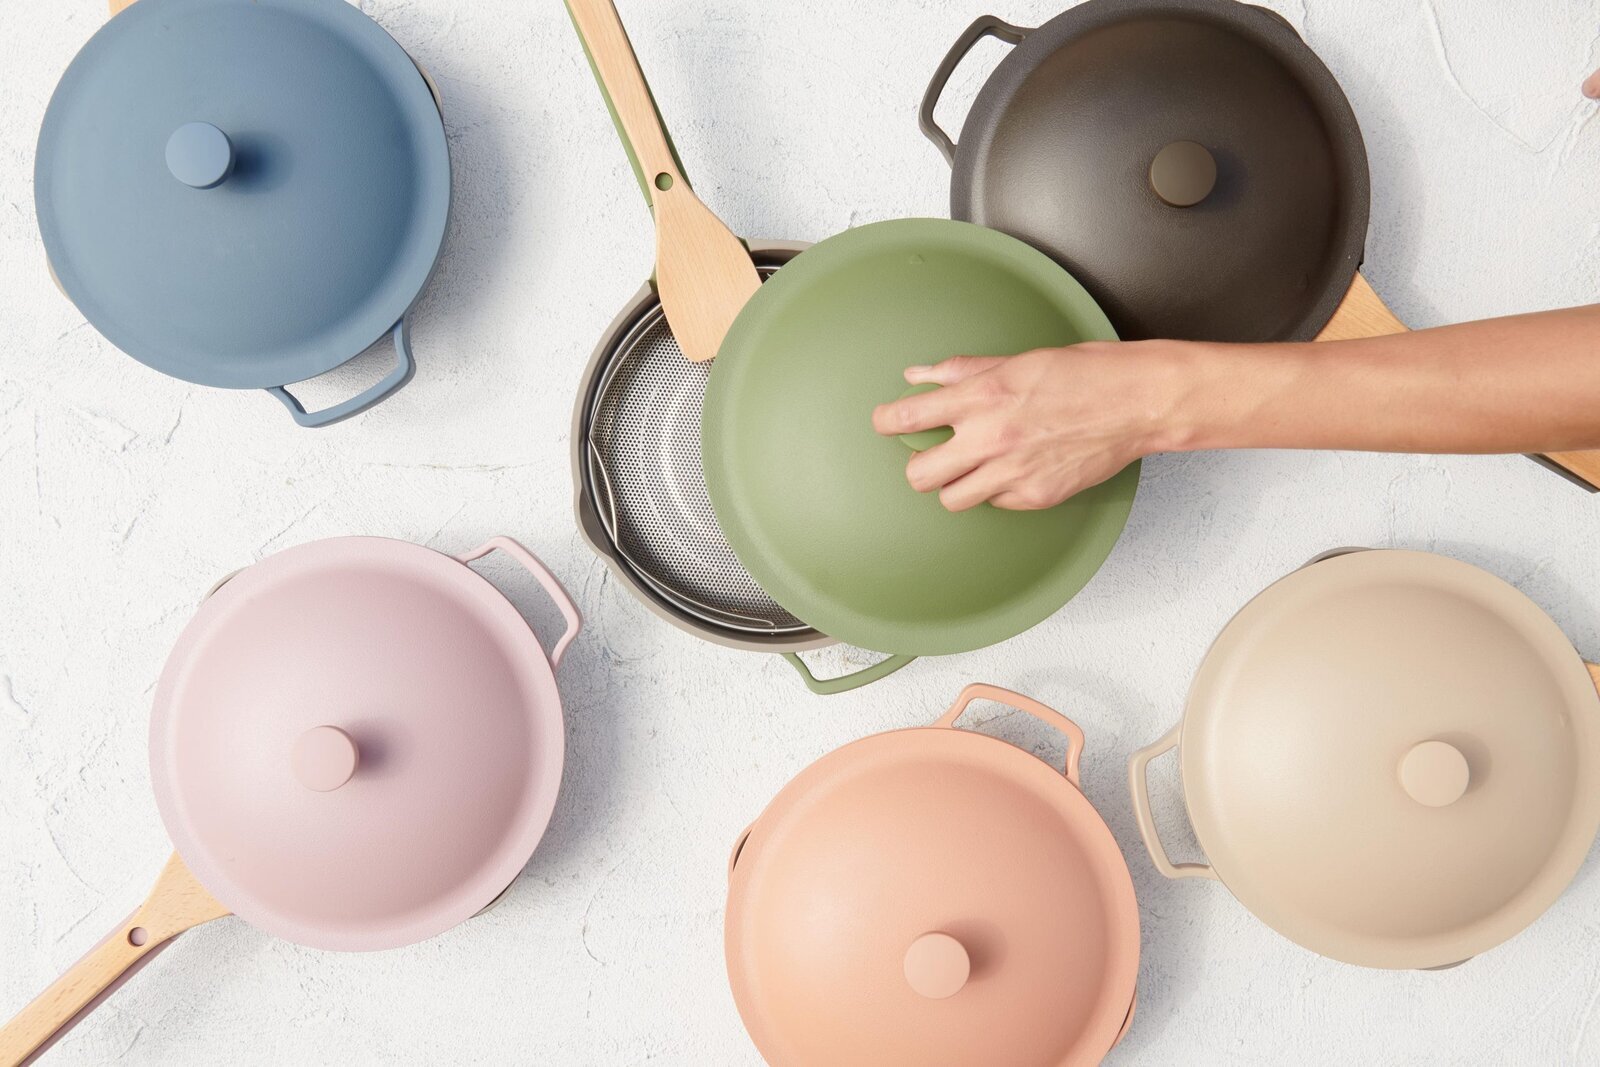 The Home's Non Toxic Cookware Guide